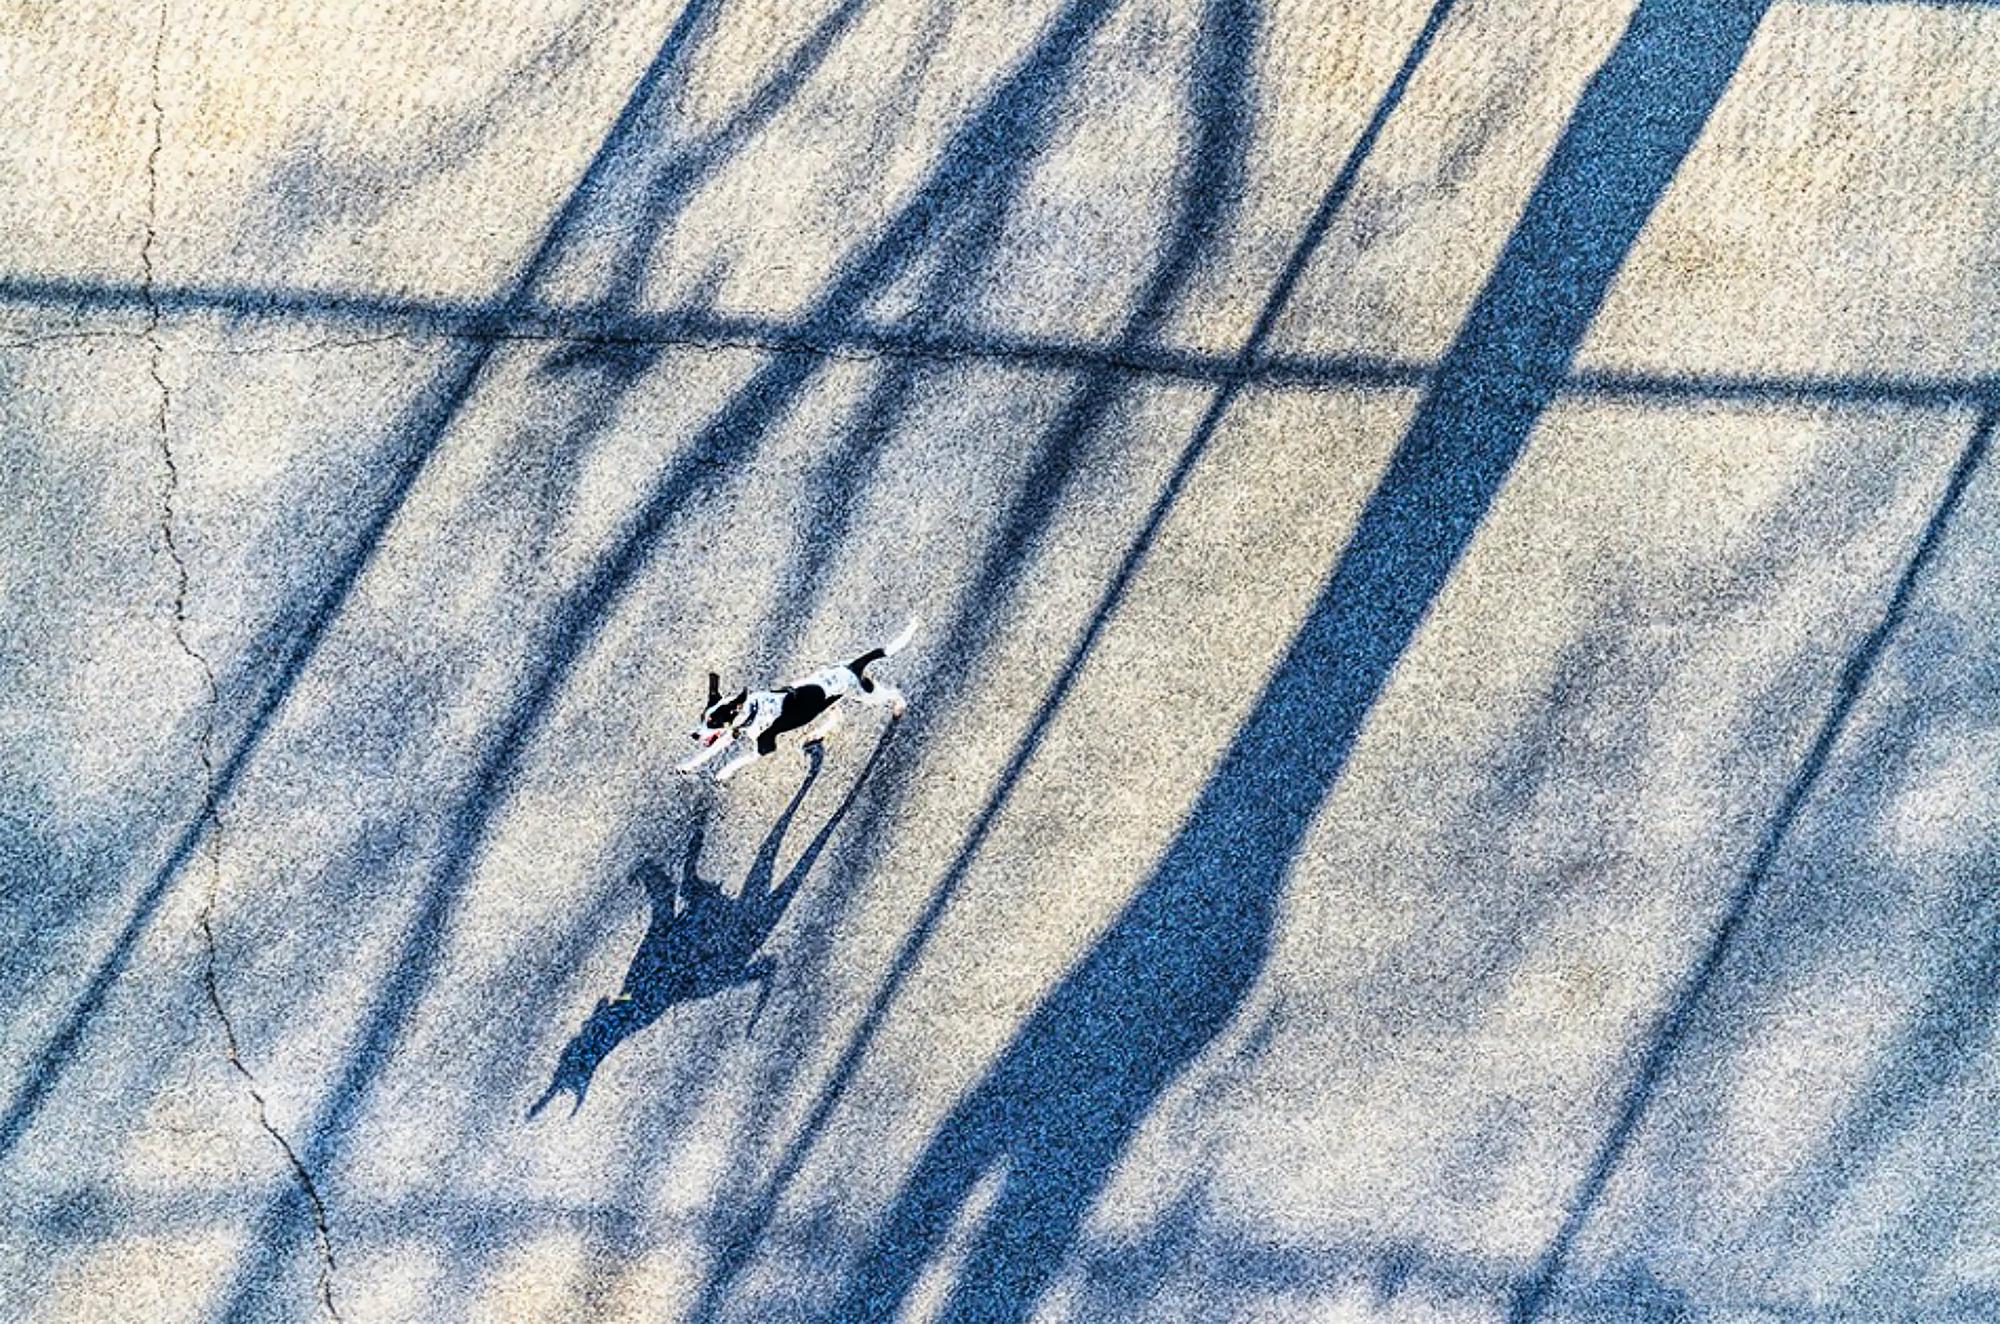 Mitchell Funk Landscape Photograph - Running Dog among the Shadows, Neutral Palette 